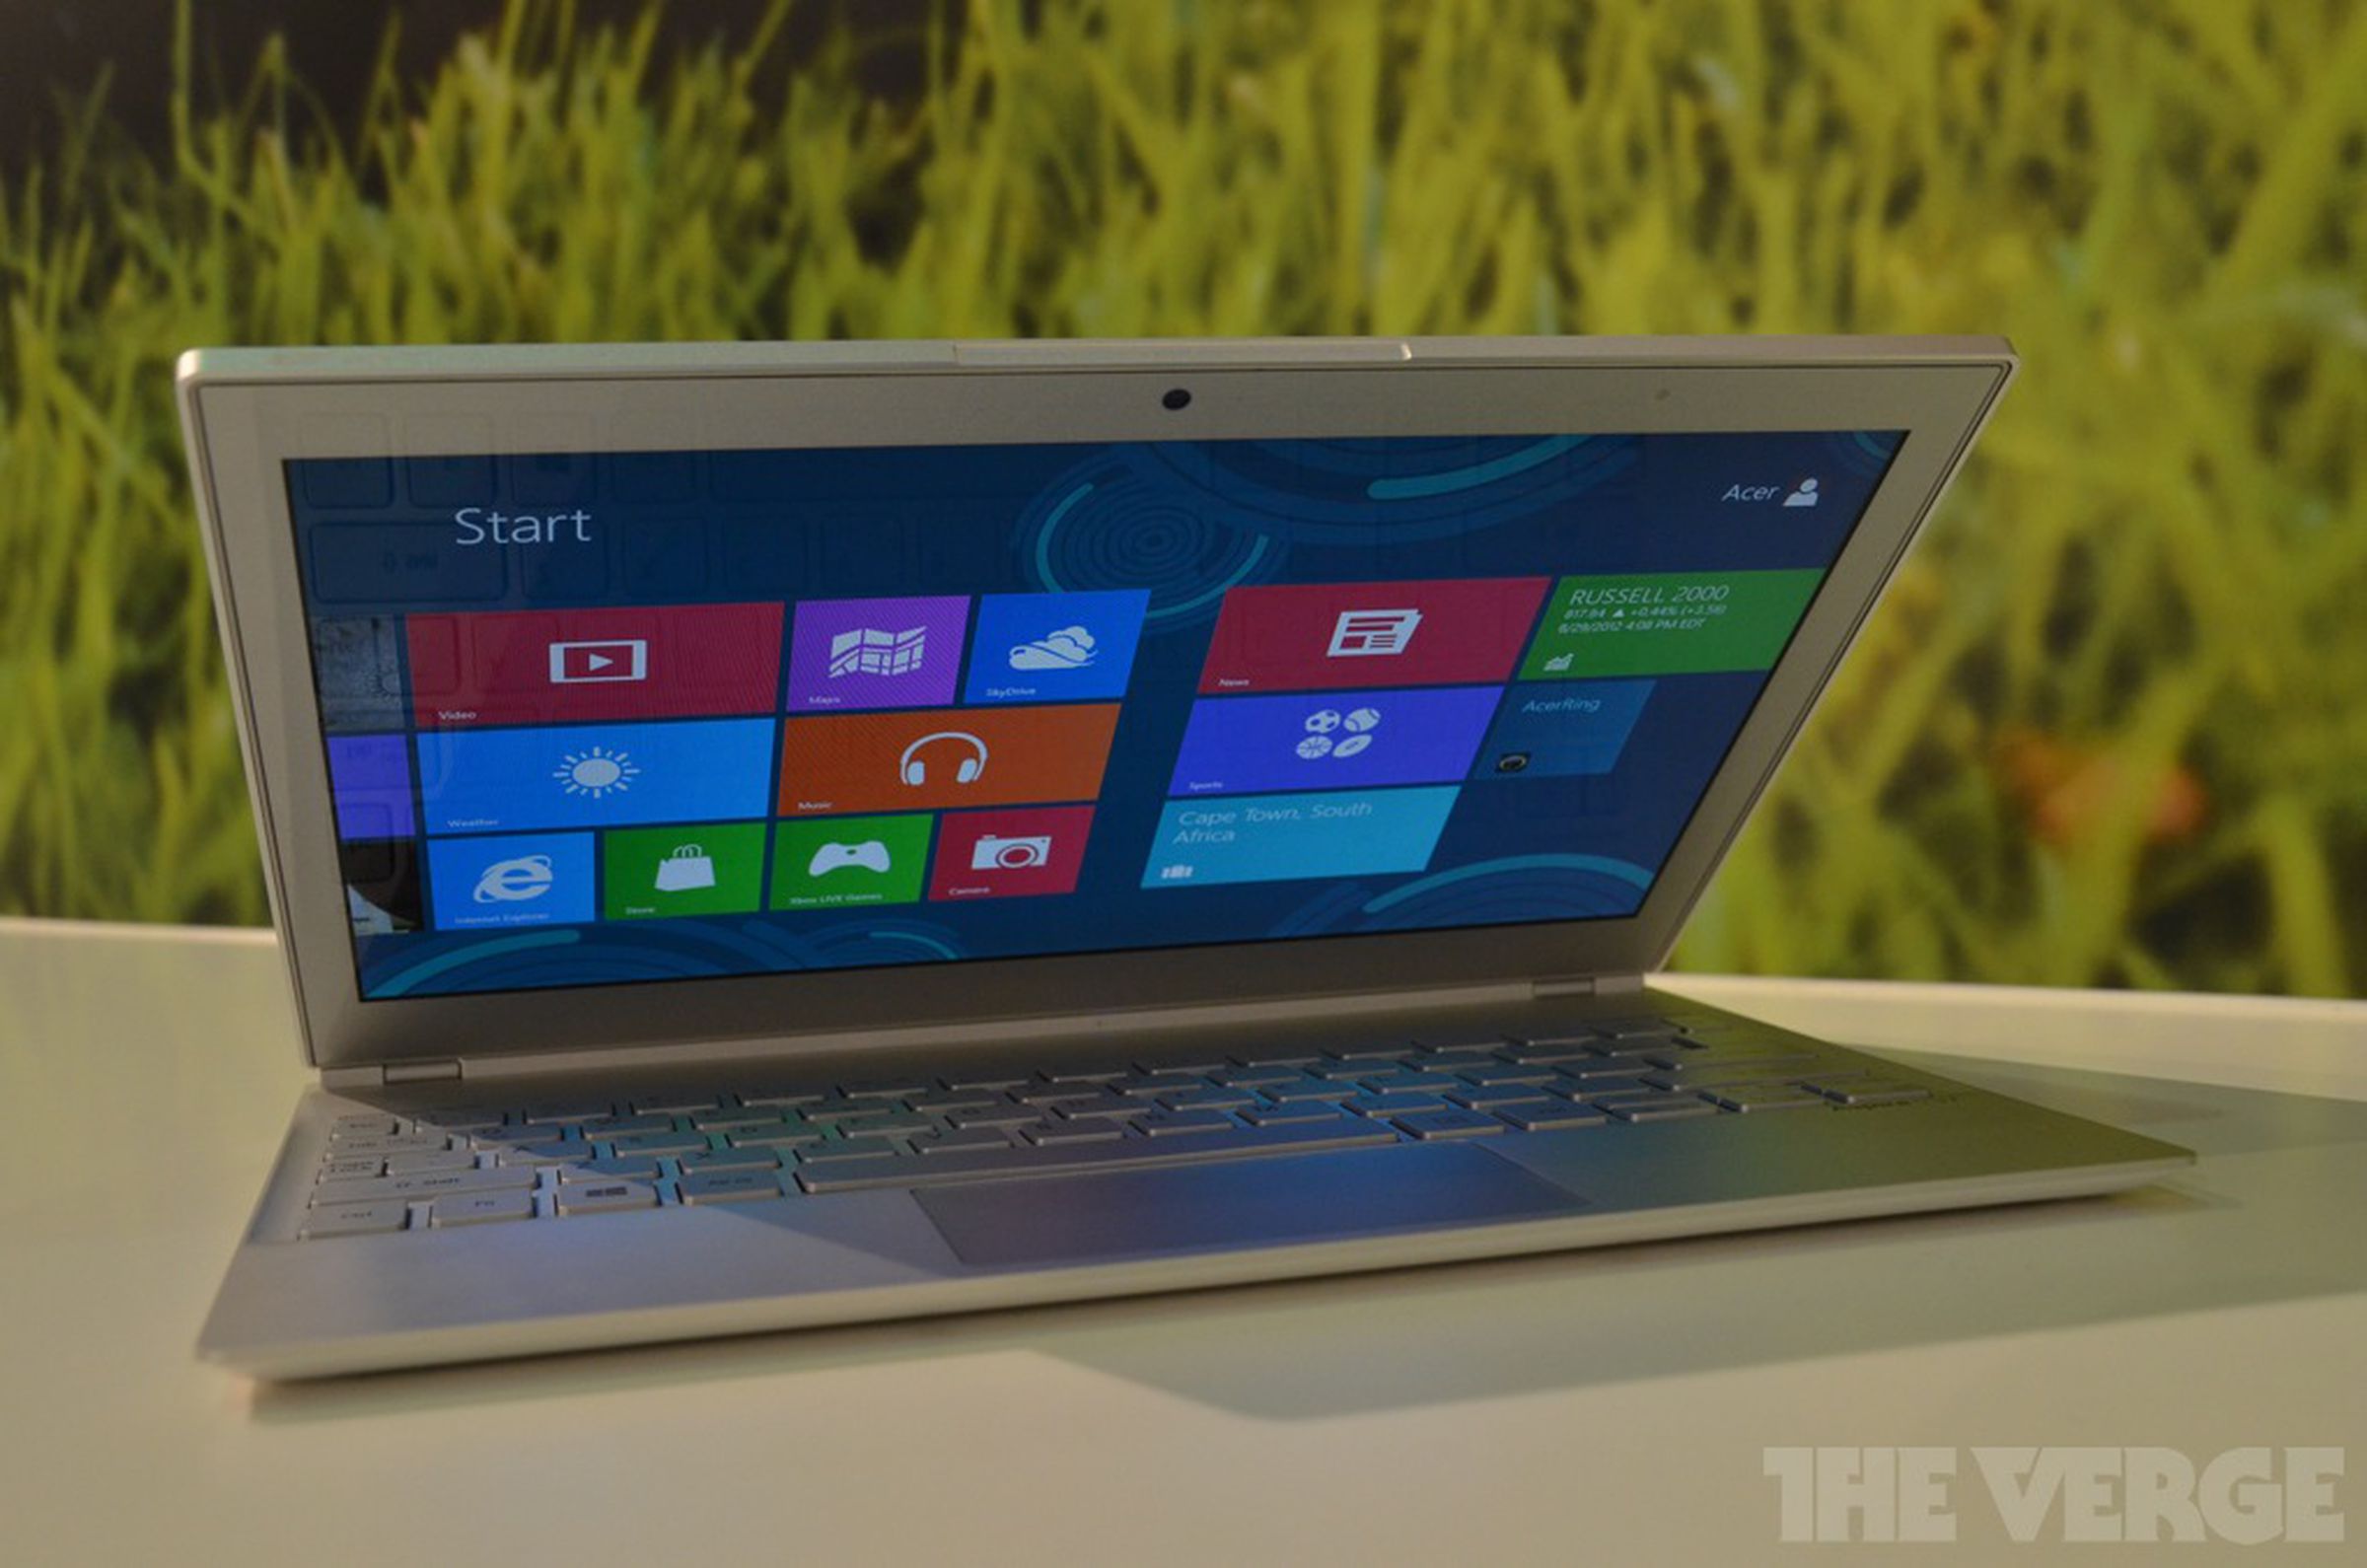 Acer Aspire S7 at IFA 2012